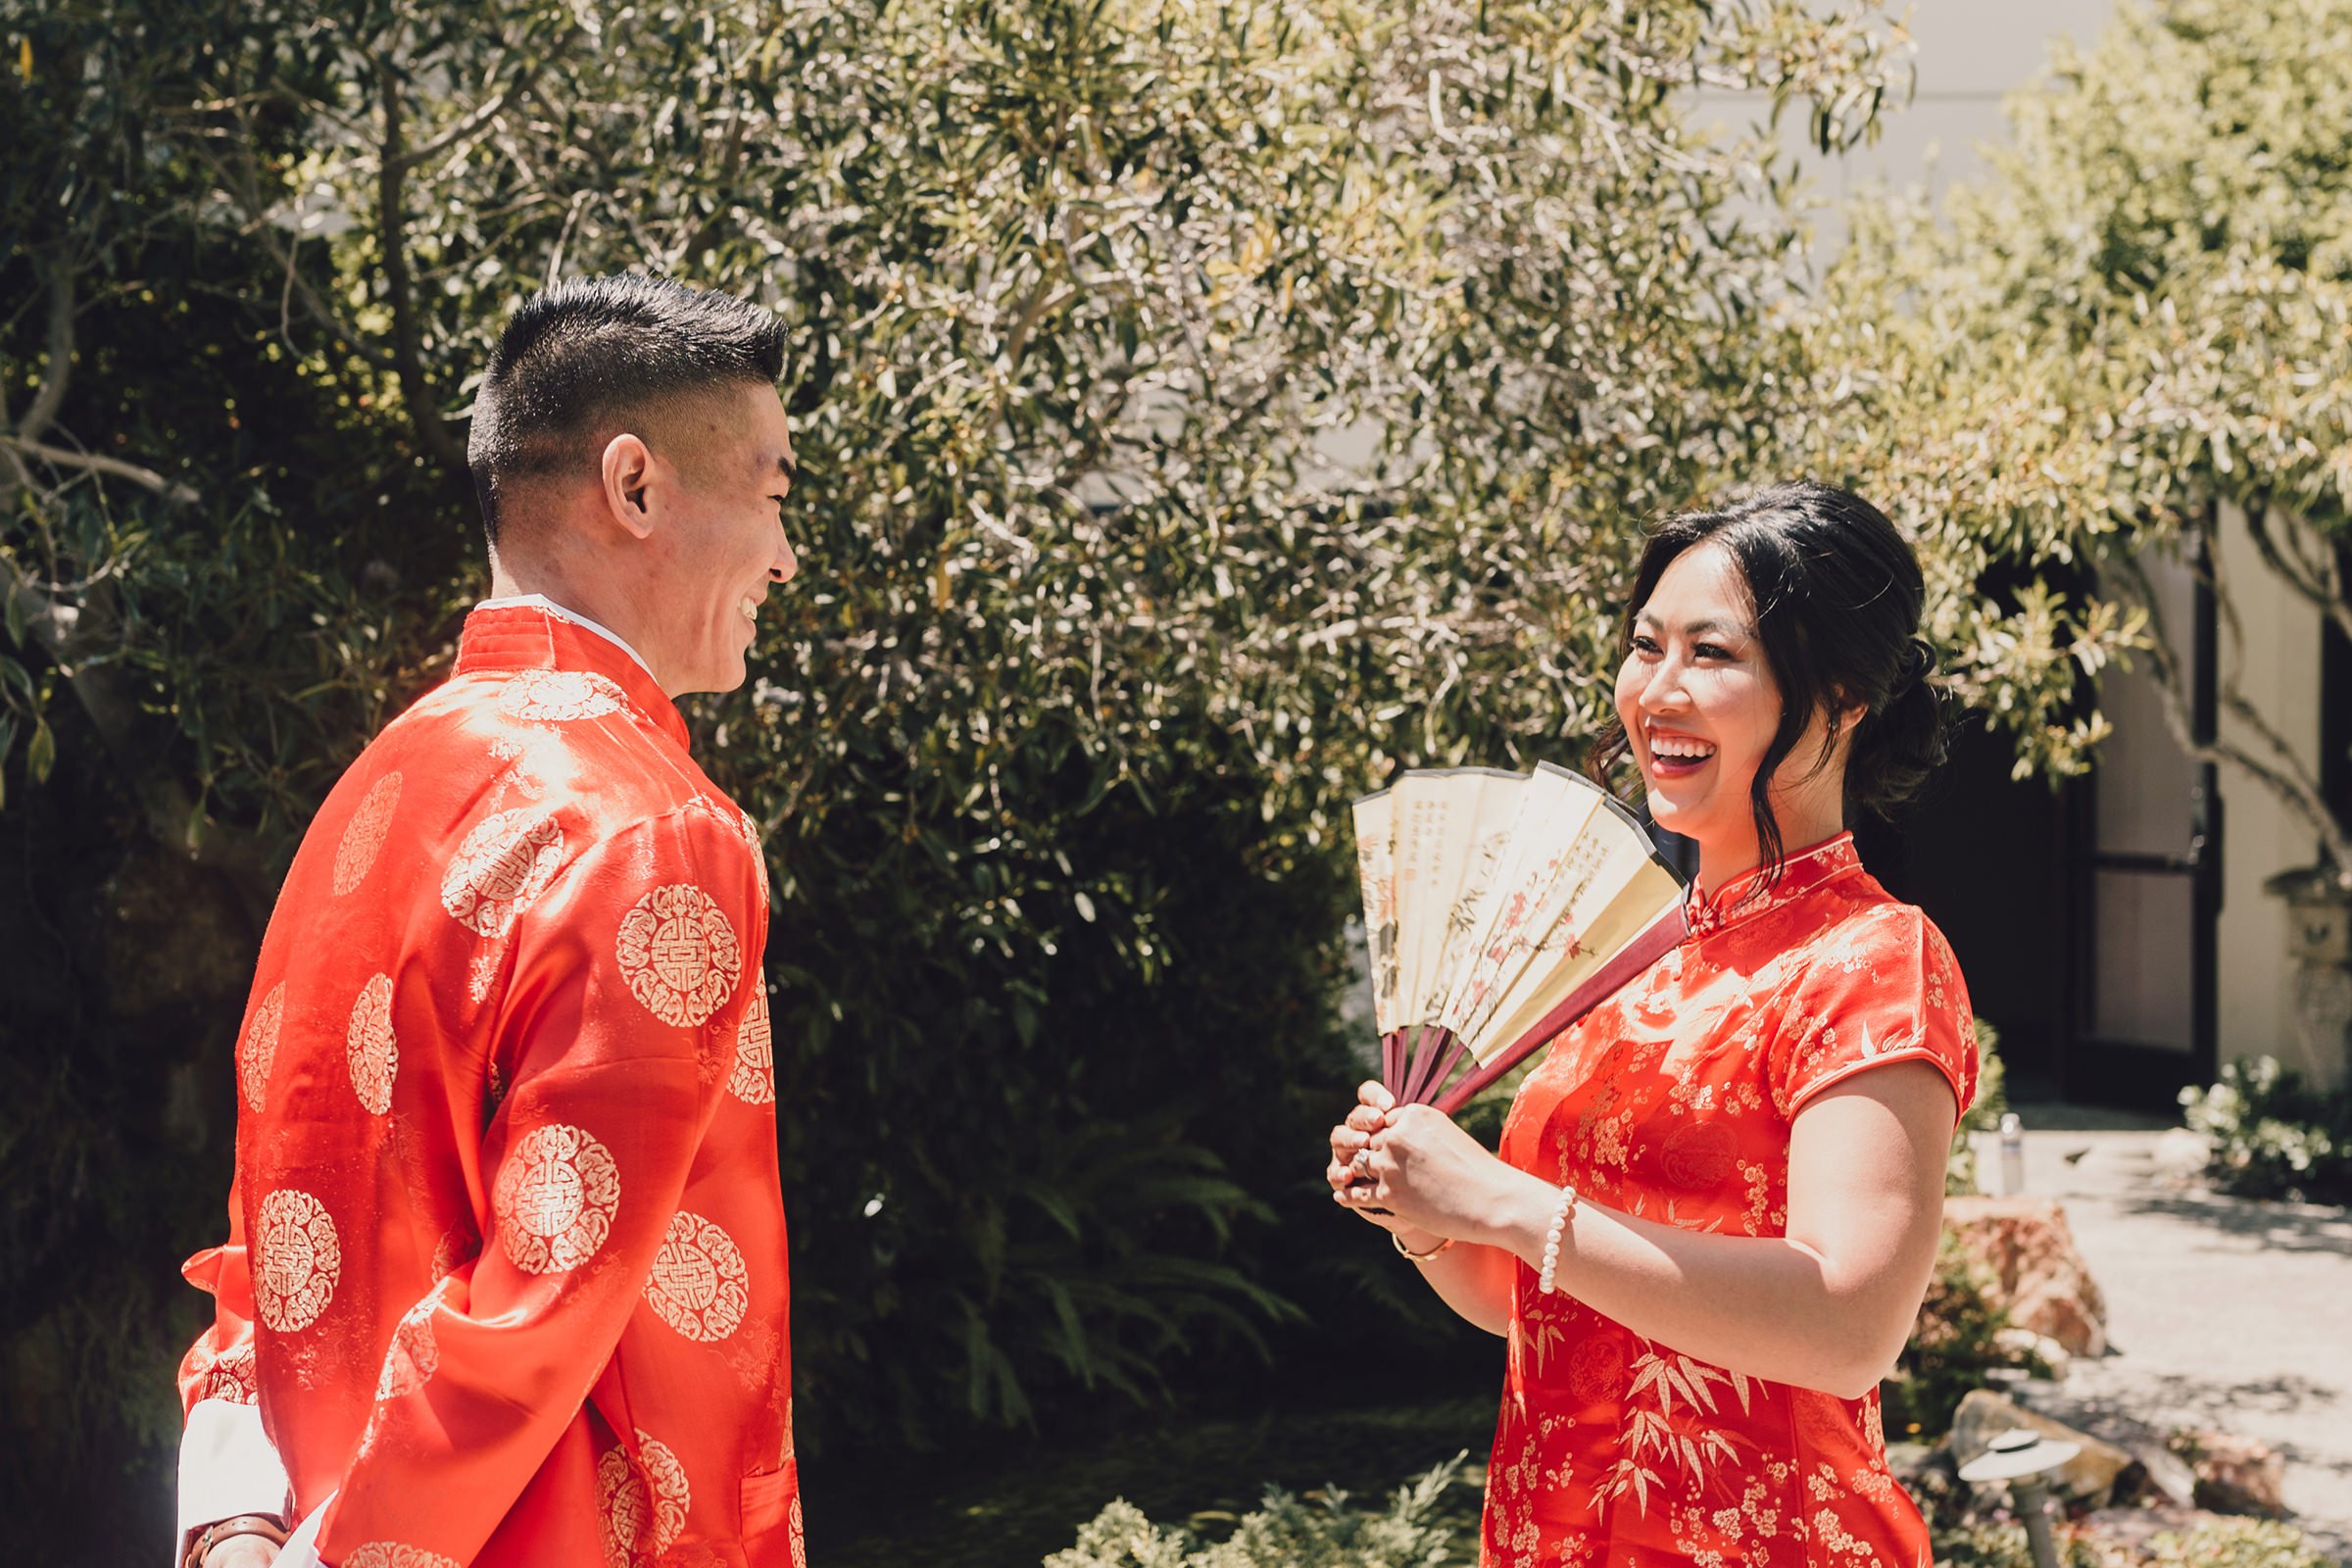 modern-asian-american-wedding-first-look-traditional-chinese-attire-socal-photographer-6.jpg